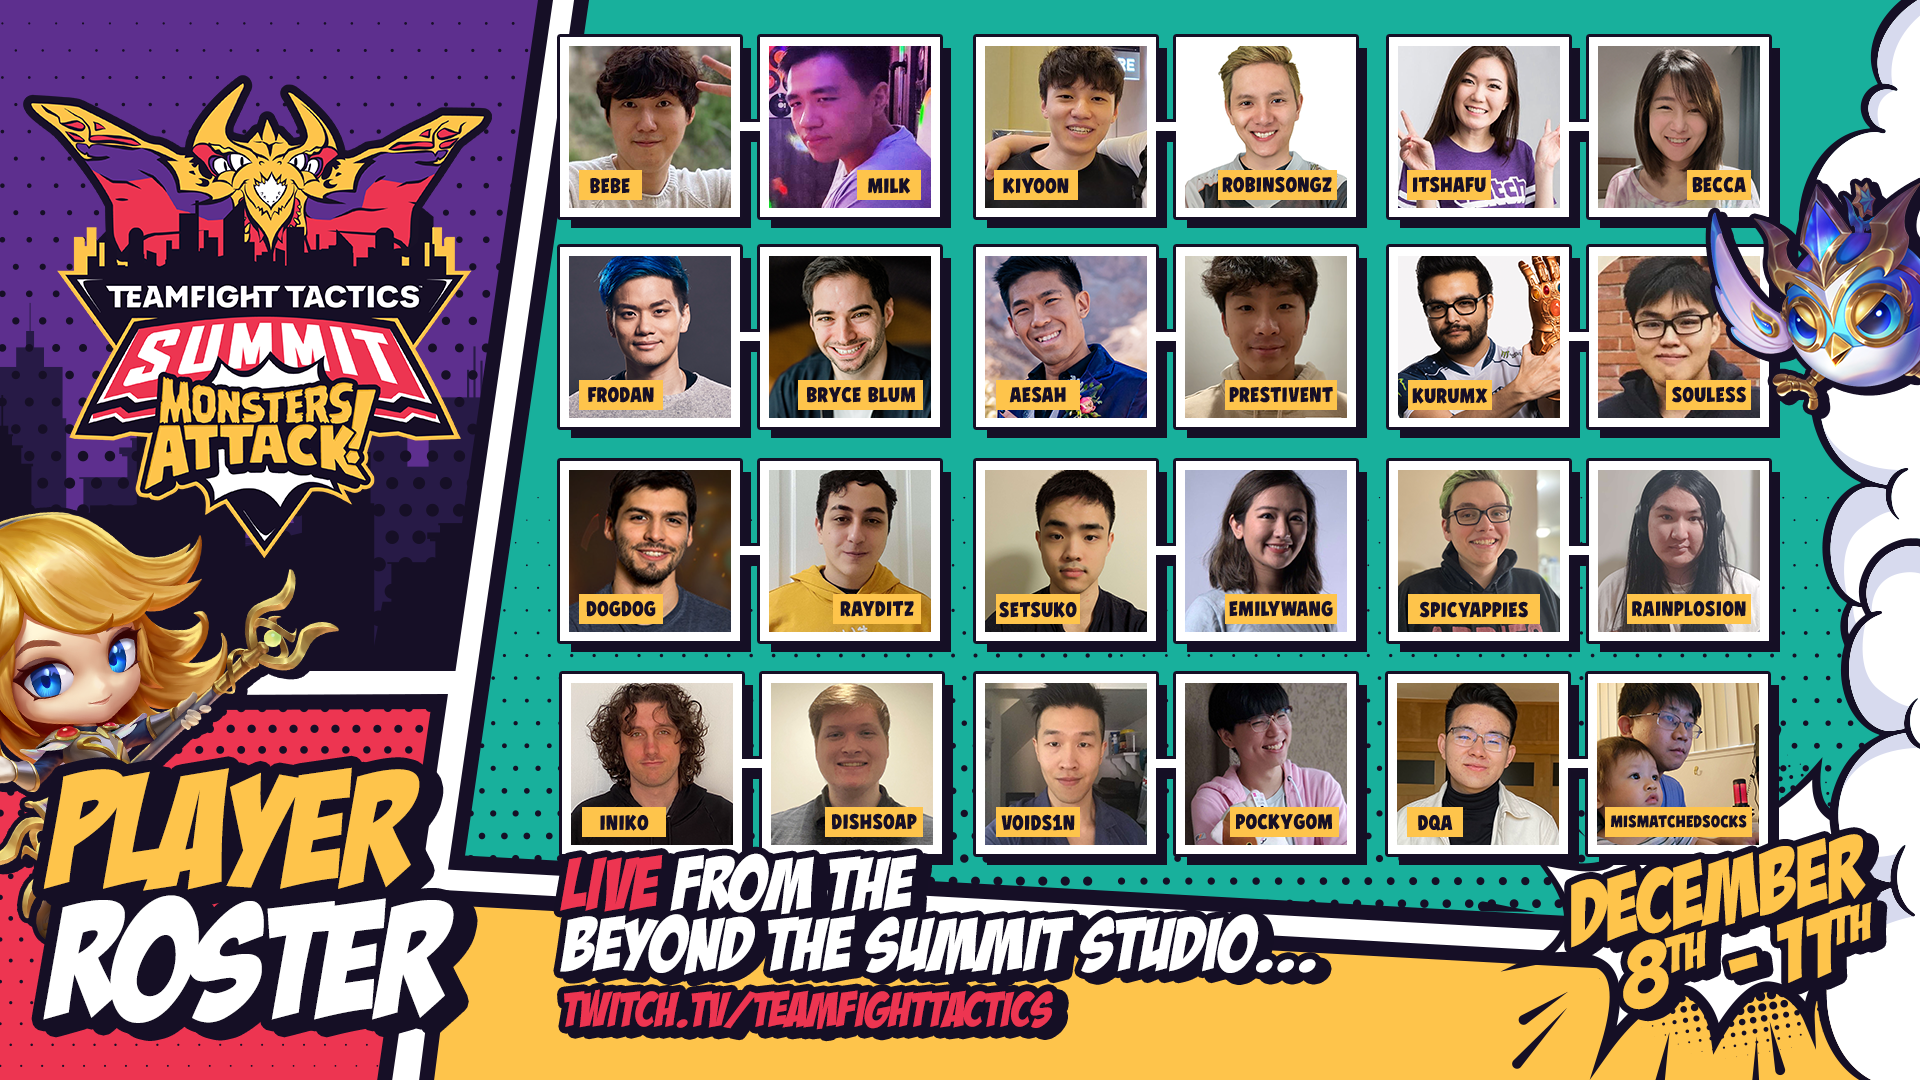 Player Roster for TFT Summit. Headshots of players are shown in pairs. Bebe and Milk. Kiyoon and Robinsongz. Itshafu and Becca. Frodan and Bryce Blum. Aesah and Prestivent. Kurumx and Souless. Dogdog and Rayditz. Setsuko and Emily Wang. Spicyappies and Rainplosion. Iniko and Dishsoap. Voidsin and Pockygom. DQA and Mismatchedsocks.